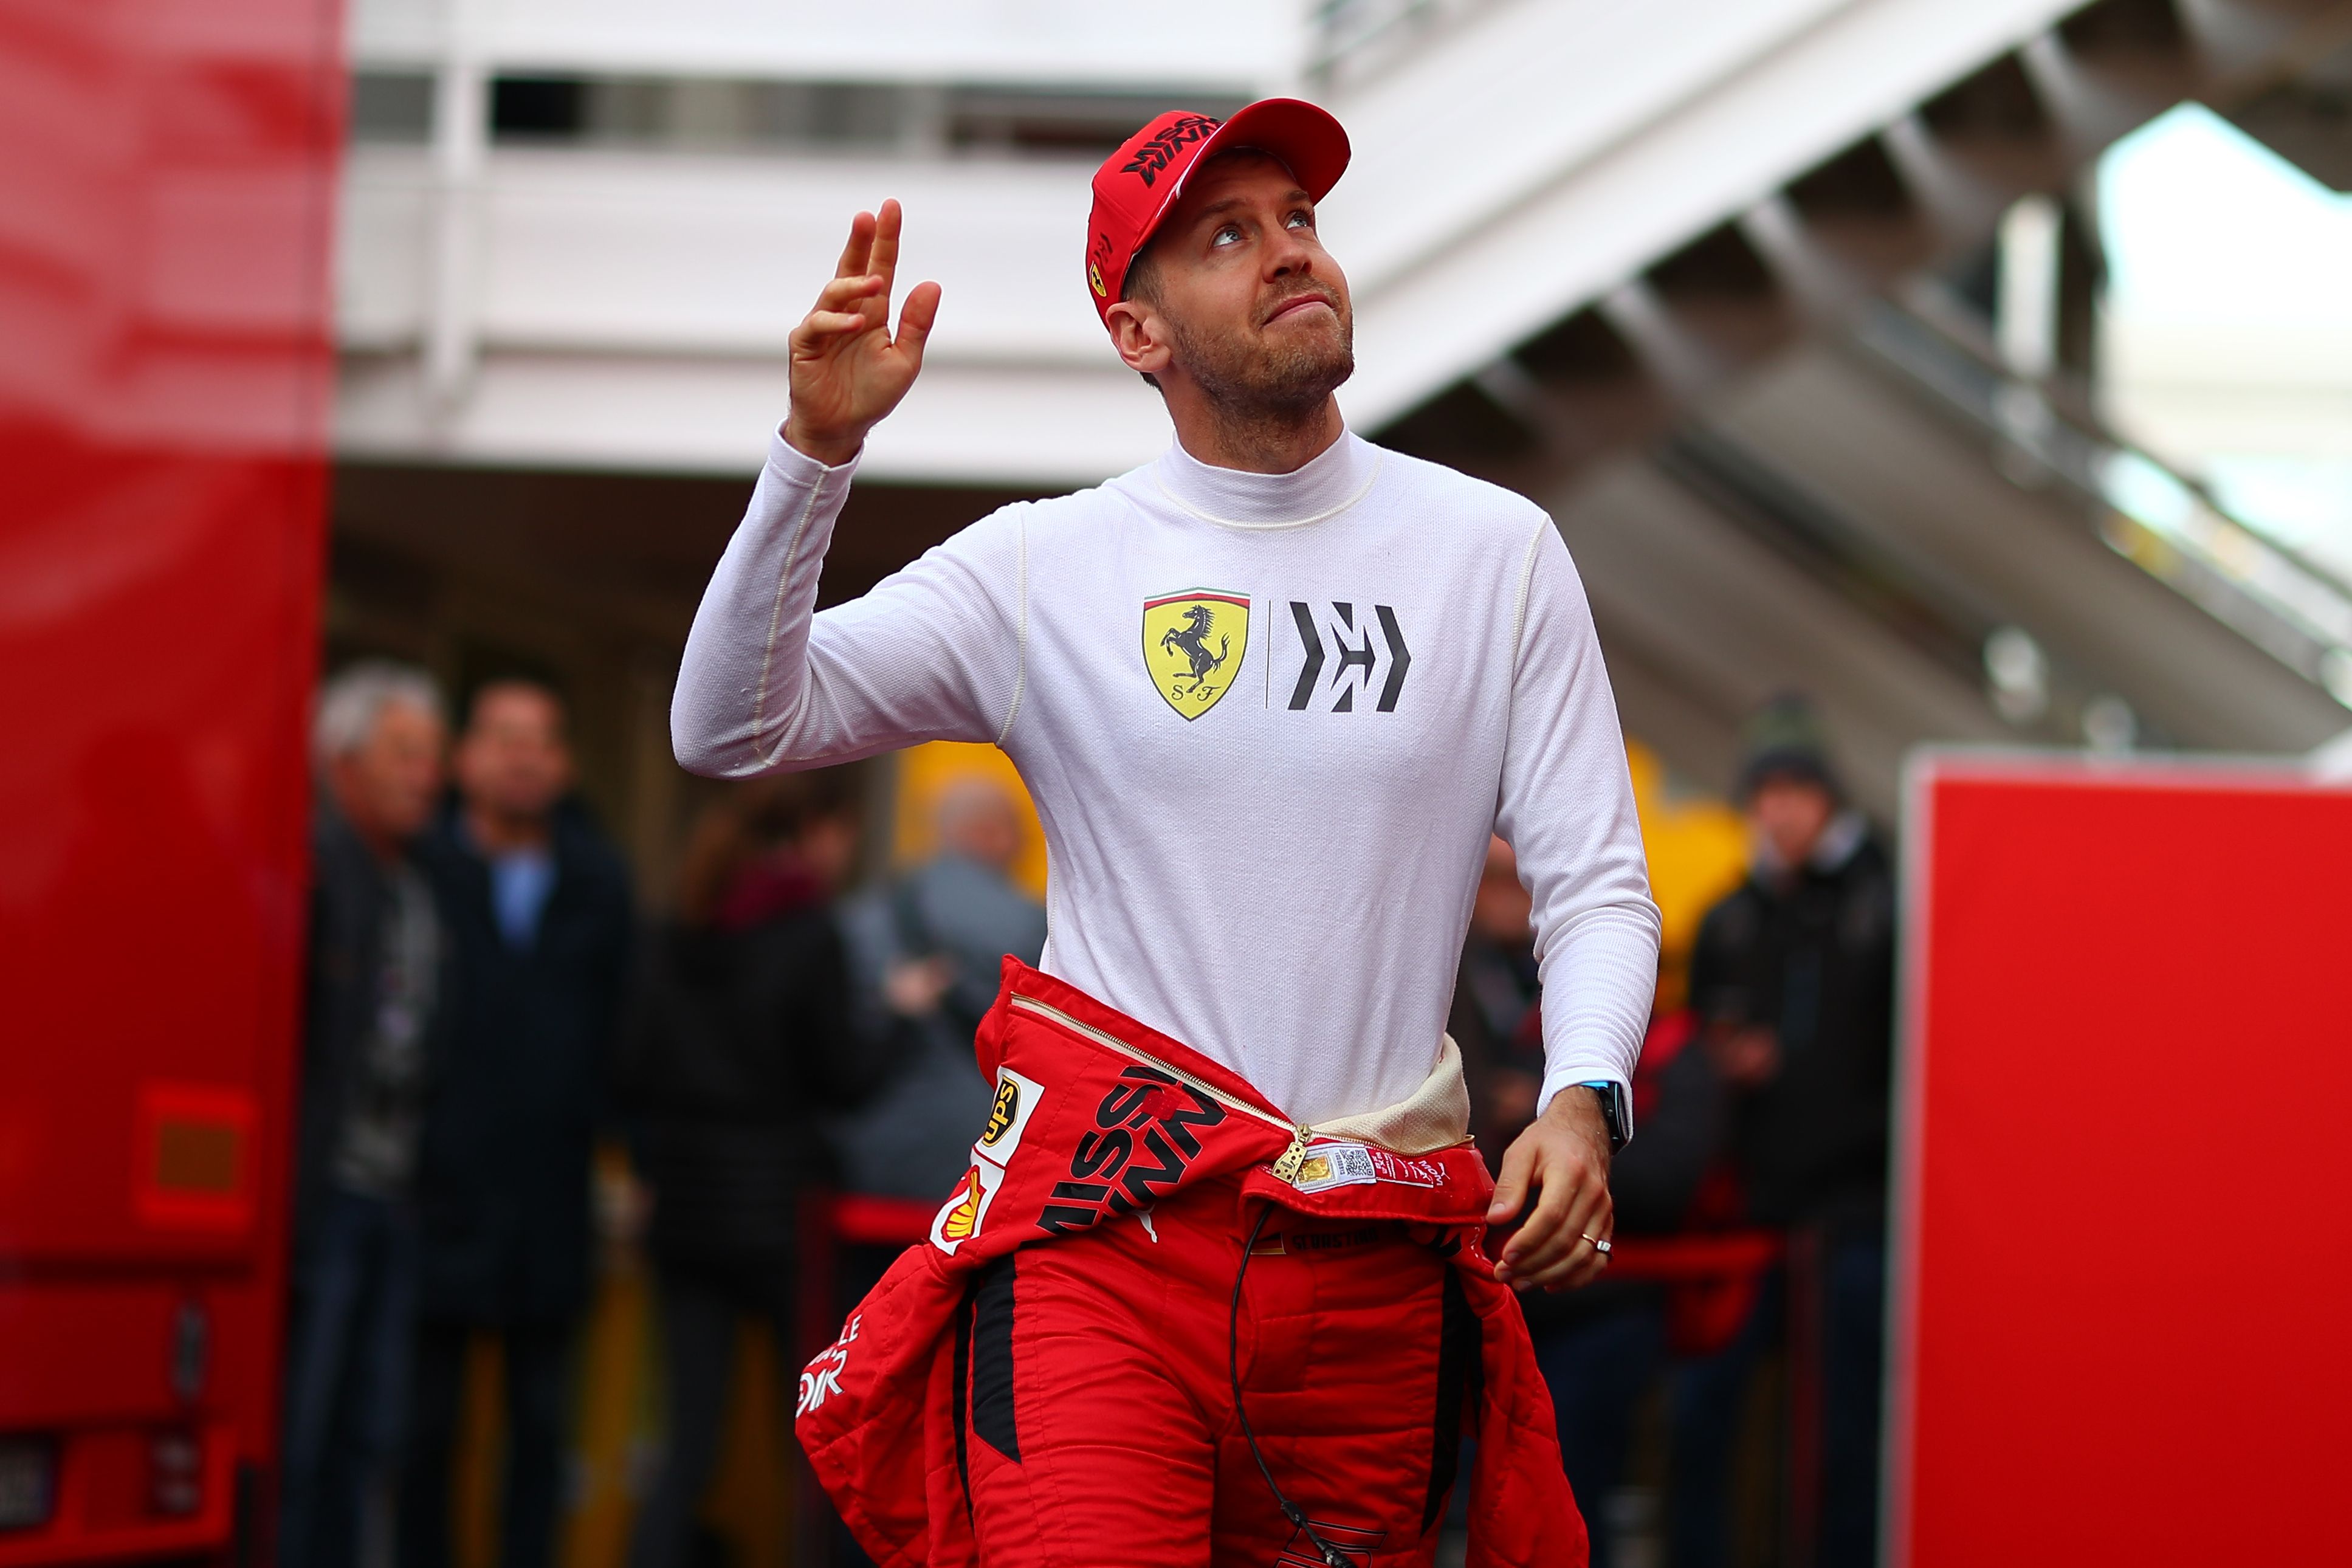 Saward Don T Count Out Four Time F1 Champ Vettel Just Yet